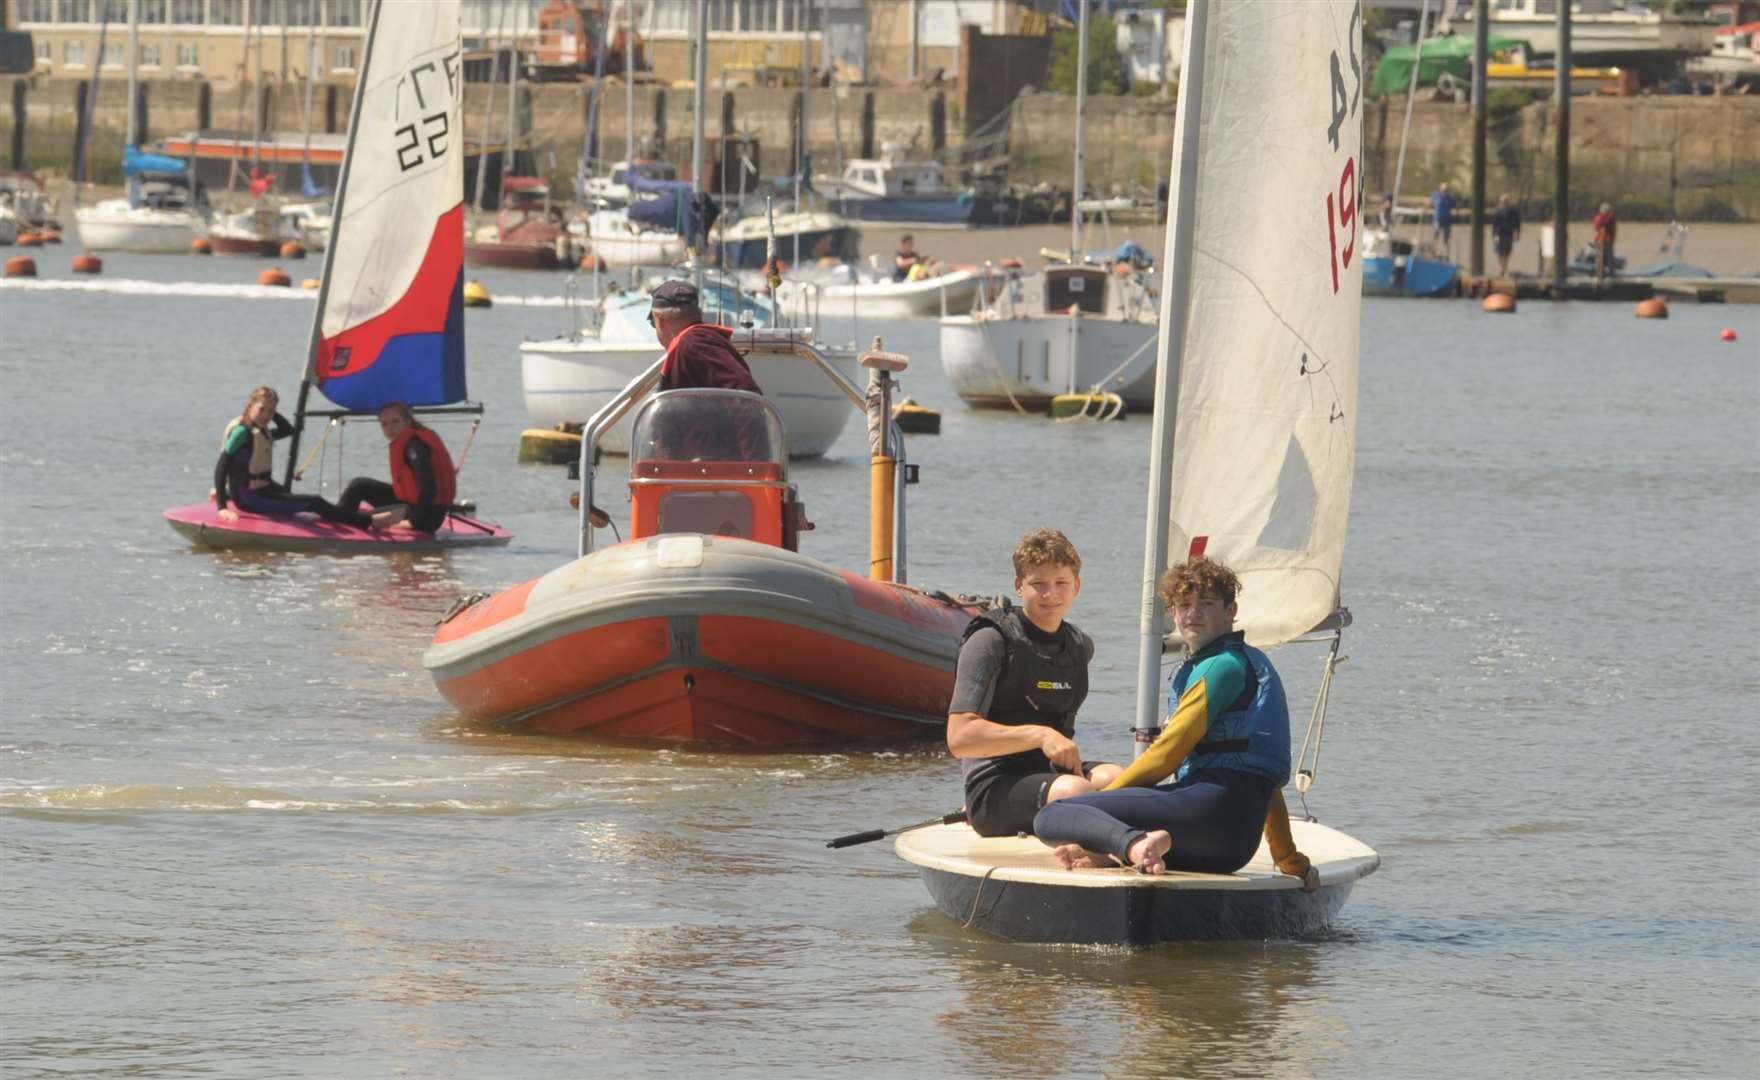 Brandon Gapper and Connor Brown at a previous Push the Boat Out on the Medway Picture: Steve Crispe